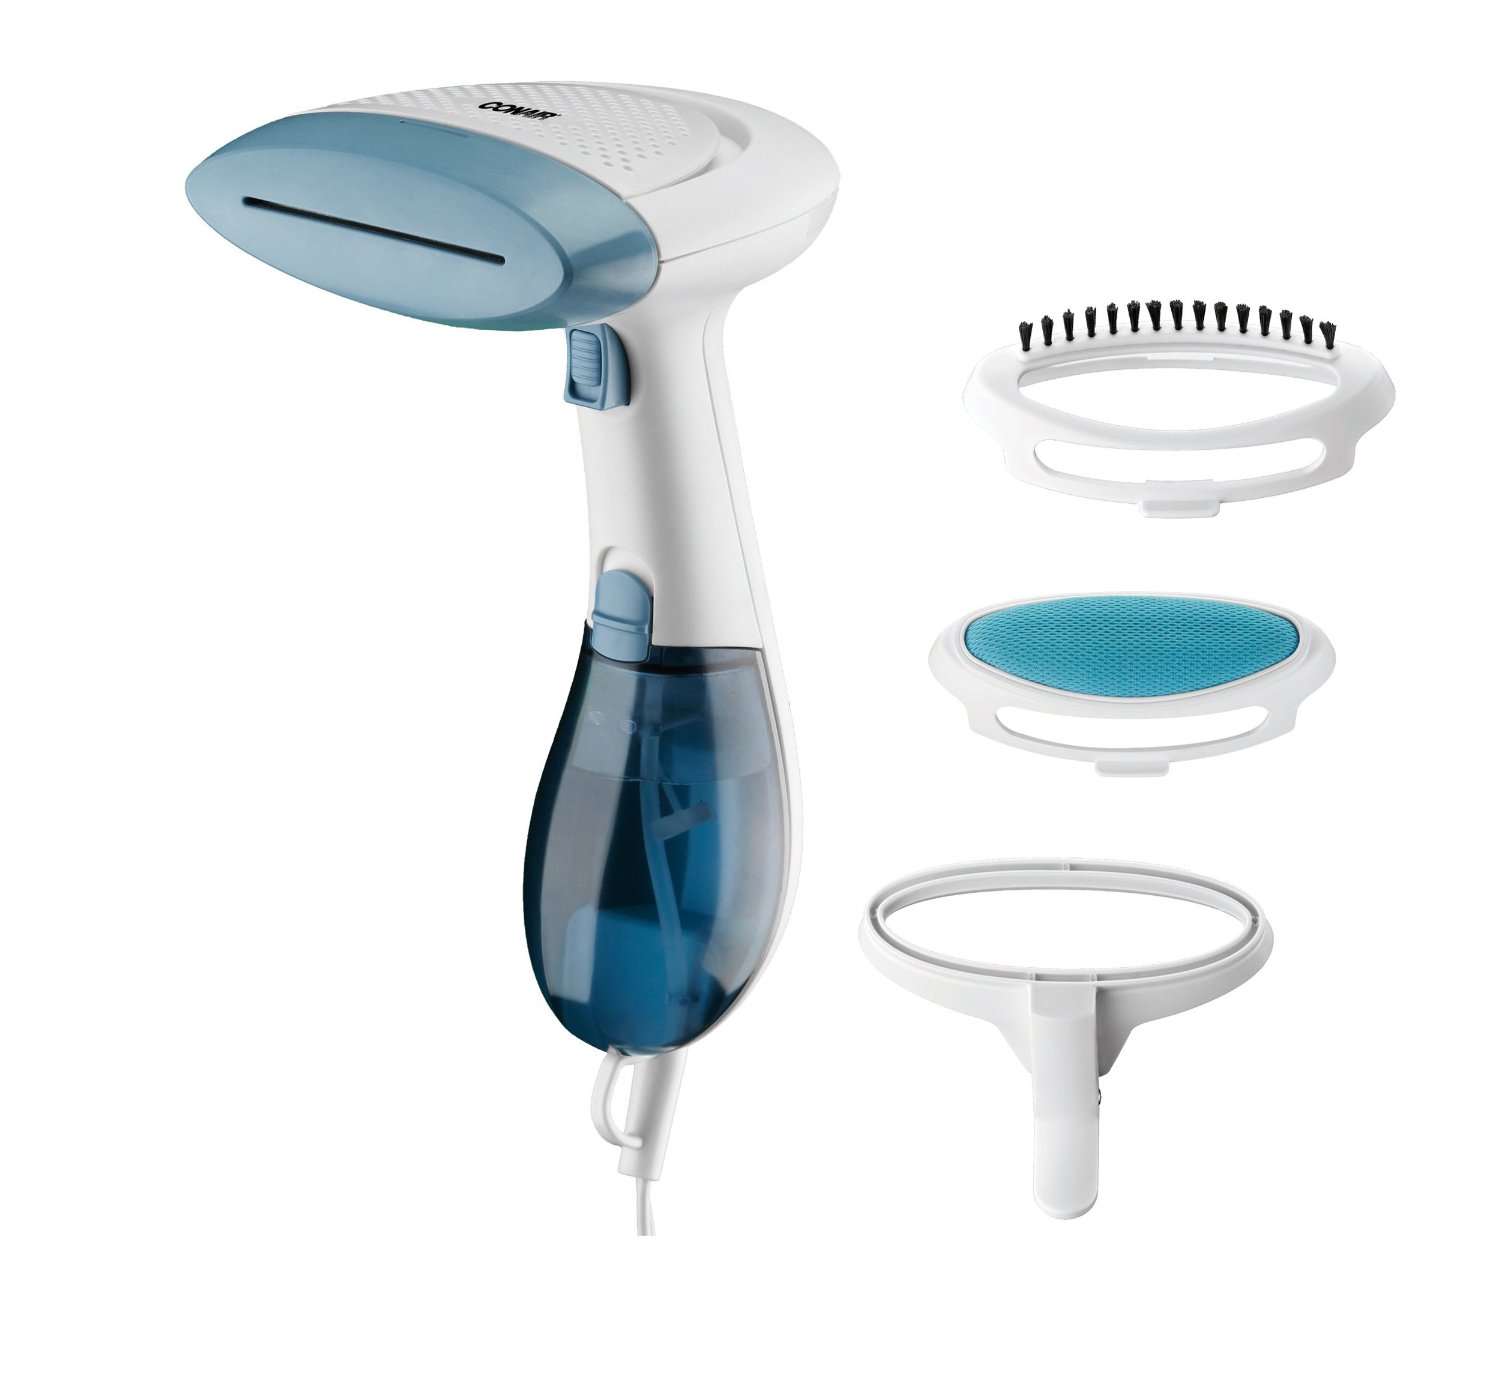 Conair Extreme Hand Held Fabric Steamer with Dual Heat